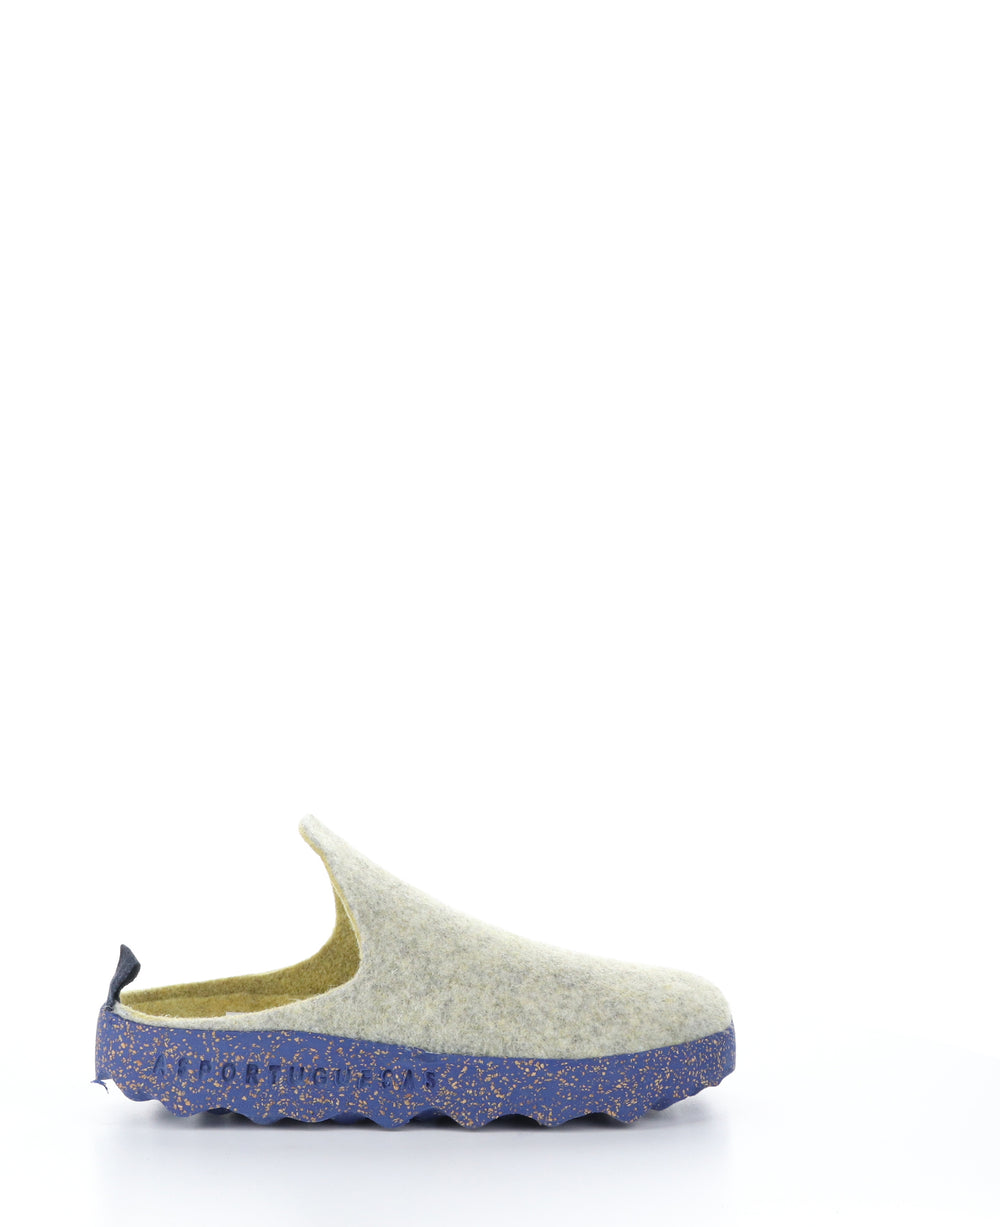 COME023ASP Grey Yellow Round Toe Shoes|COME023ASP Chaussures à Bout Rond in Gris